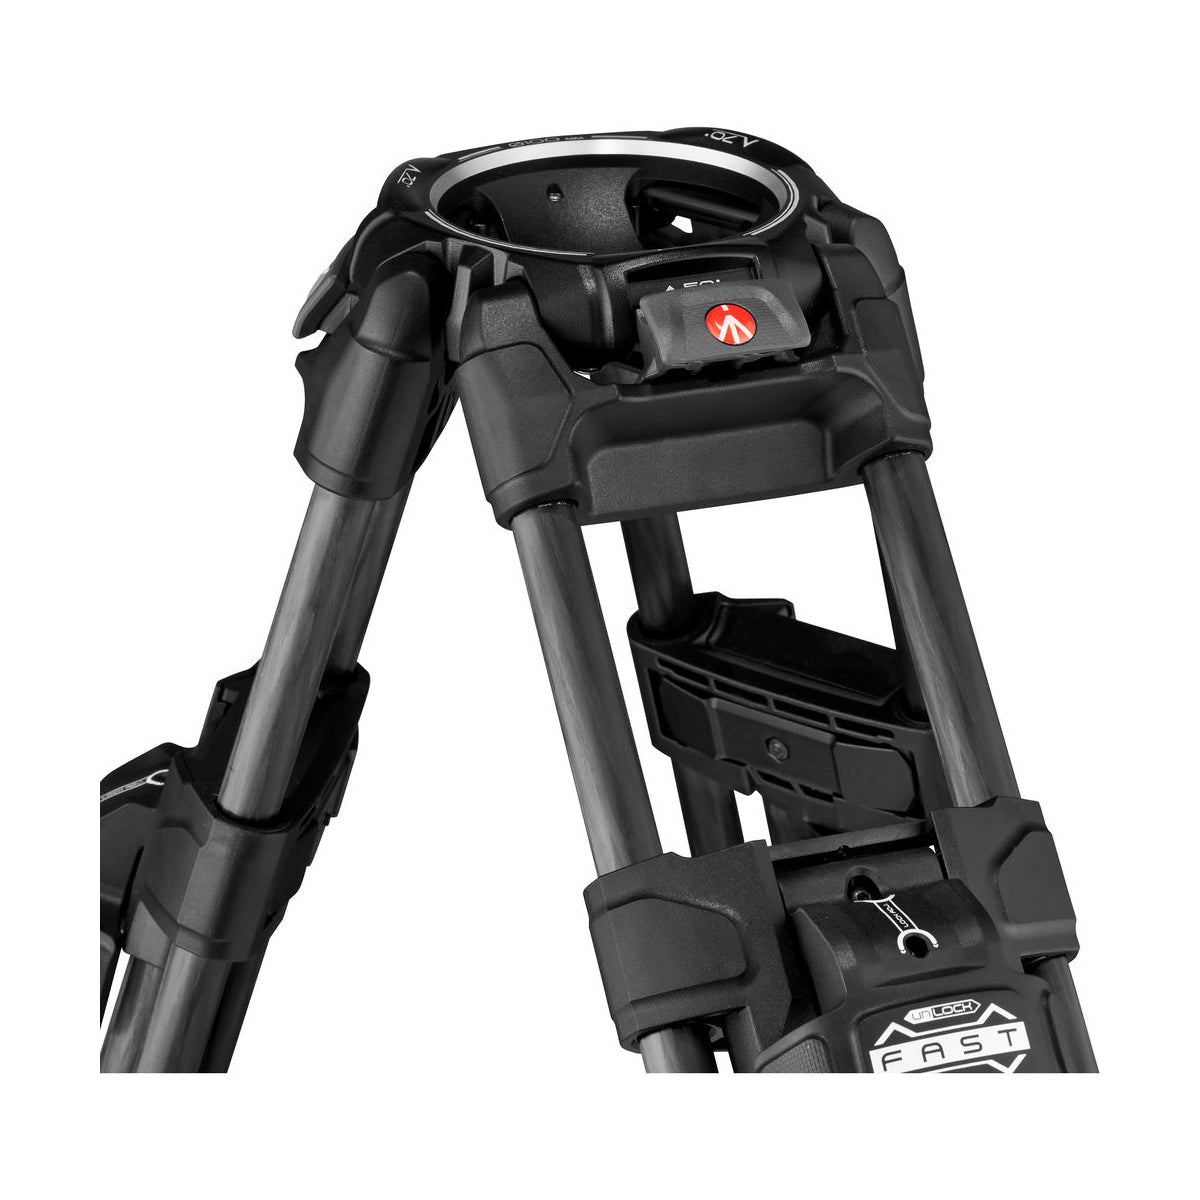 Manfrotto MVK608TWINFCUS Kit with Nitrotech 608 Fluid Head and 645 Fast Twin Leg Carbon Fiber Tripod & Bag